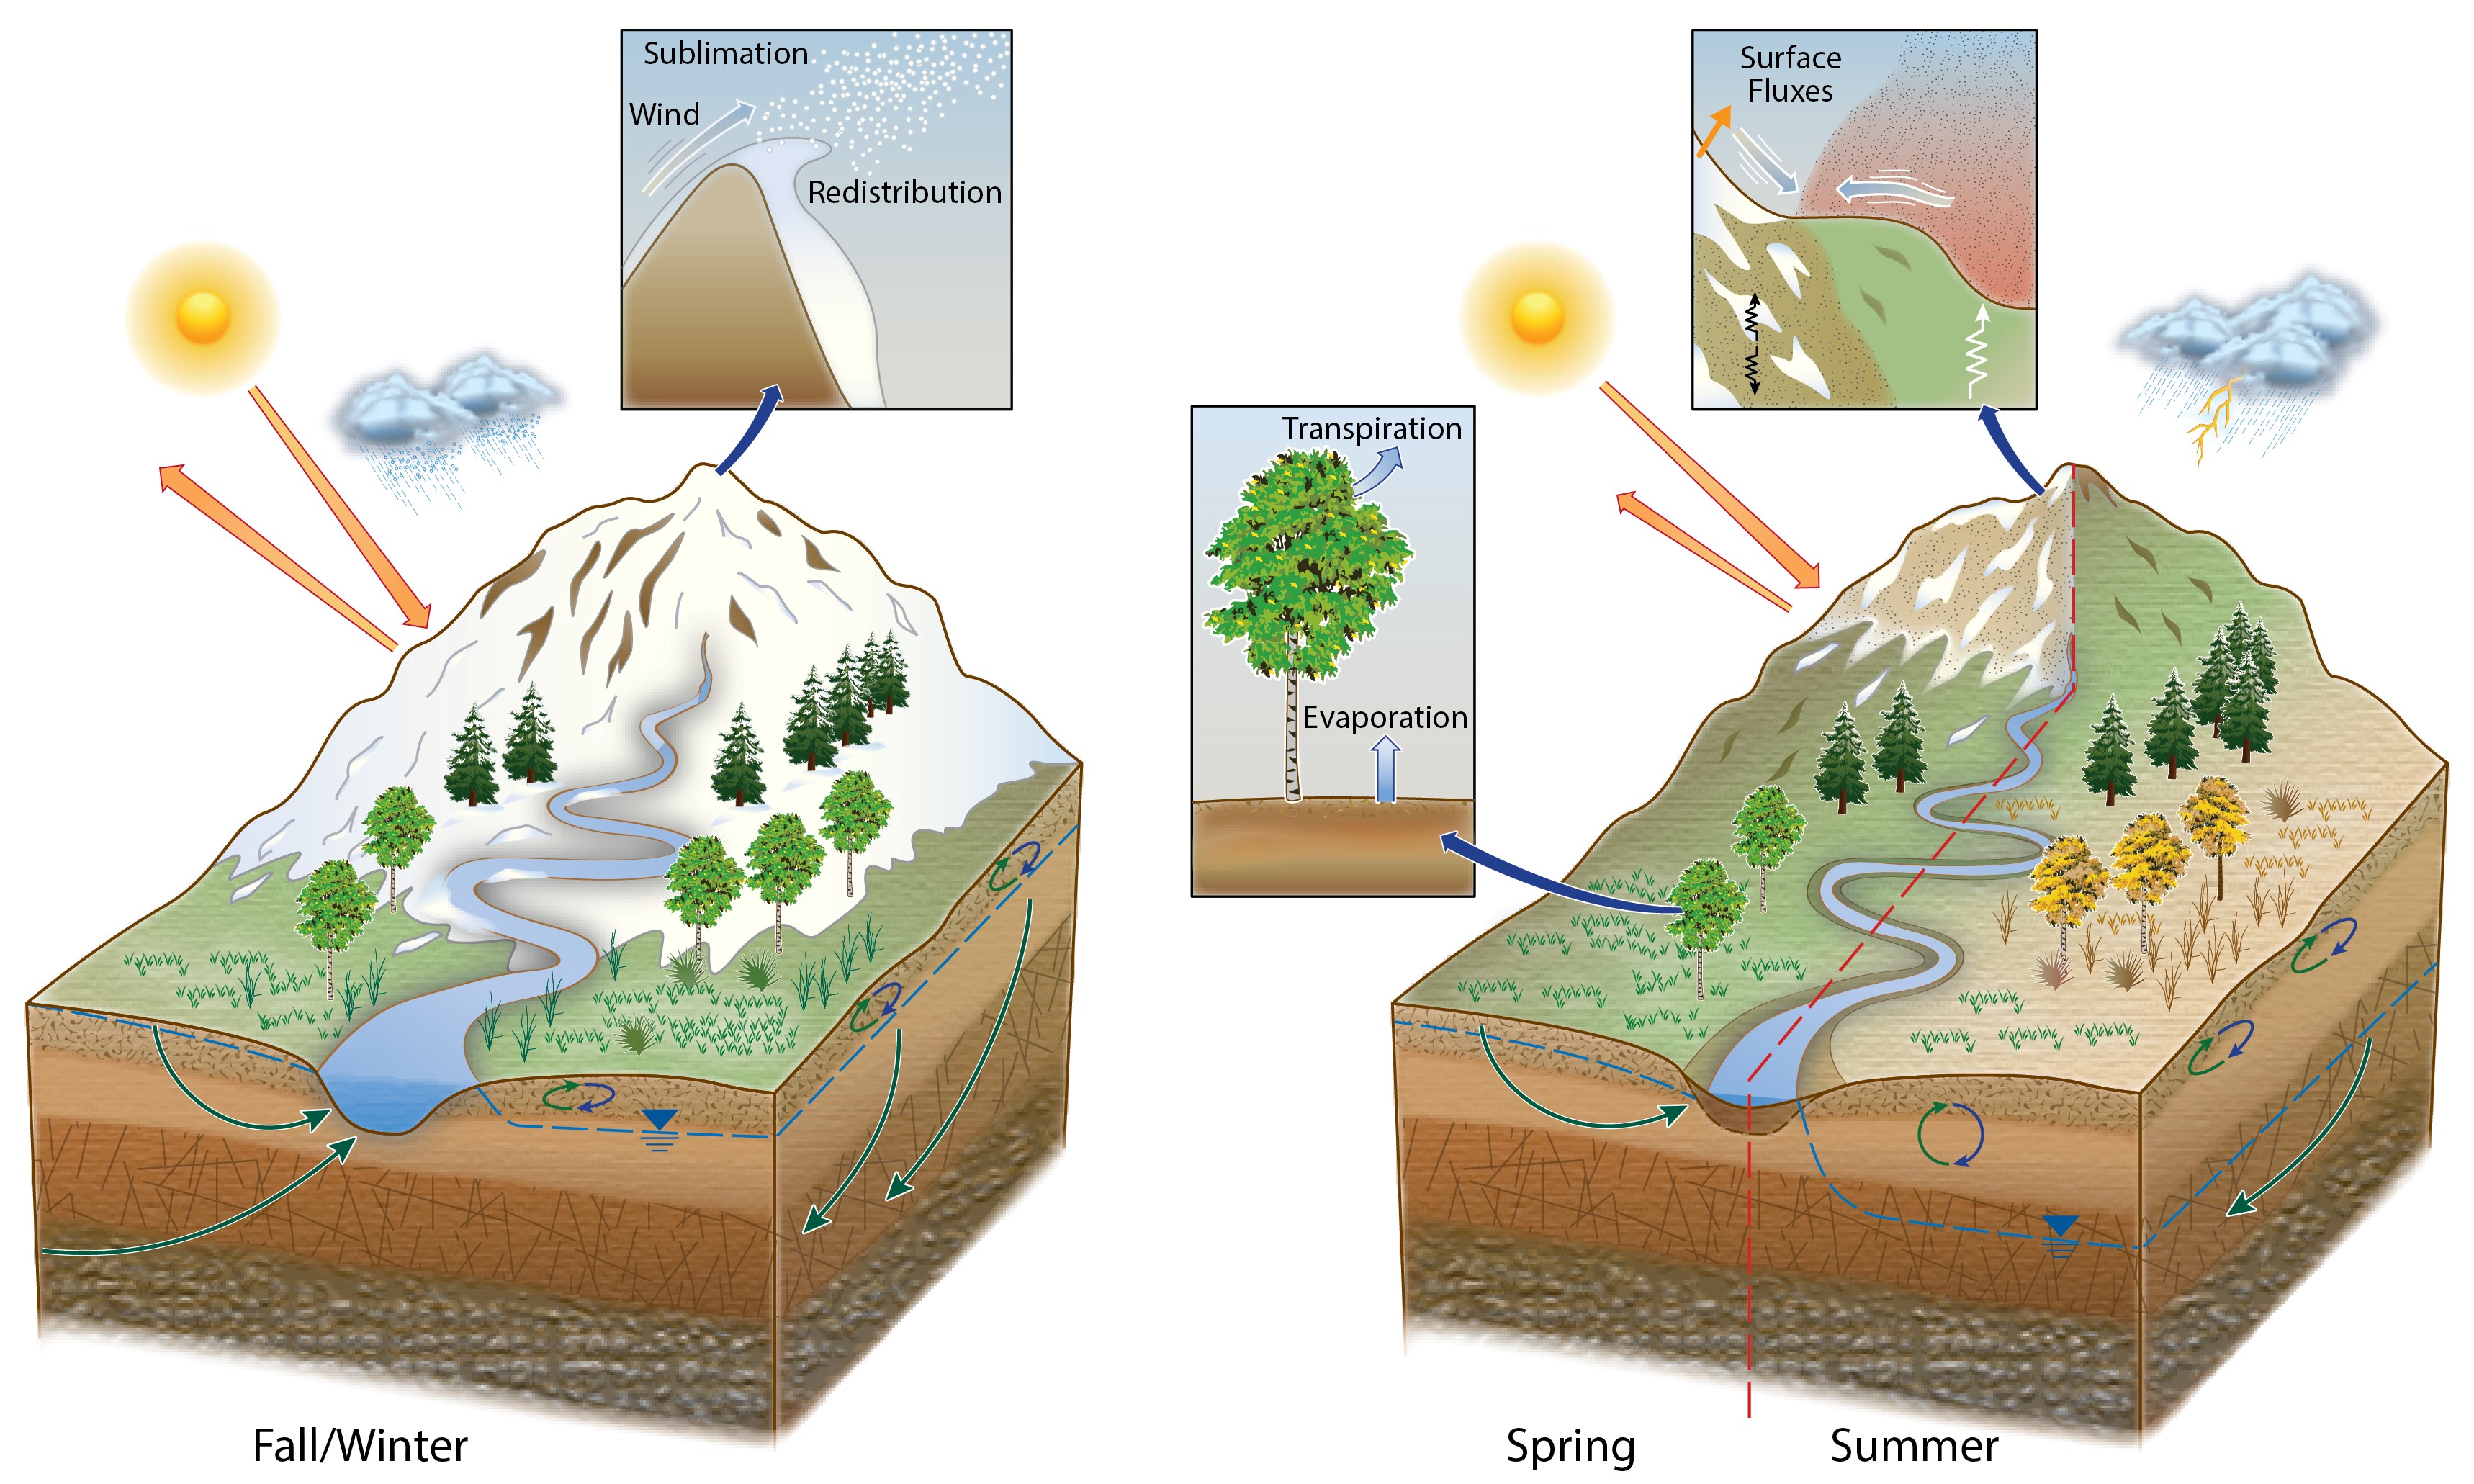 Figure 1 from the 2021 SAIL science plan shows the dominant atmospheric and surface processes and their interseasonal variability in mid-latitude continental interior mountain watersheds, all of which impact hydrology. During fall and winter, the dominant processes include precipitation, radiation, snow sublimation, and wind redistribution. During spring and summer, the dominant processes include evapotranspiration, radiation including dust-on-snow and surface heating, advective flows, and convection. 